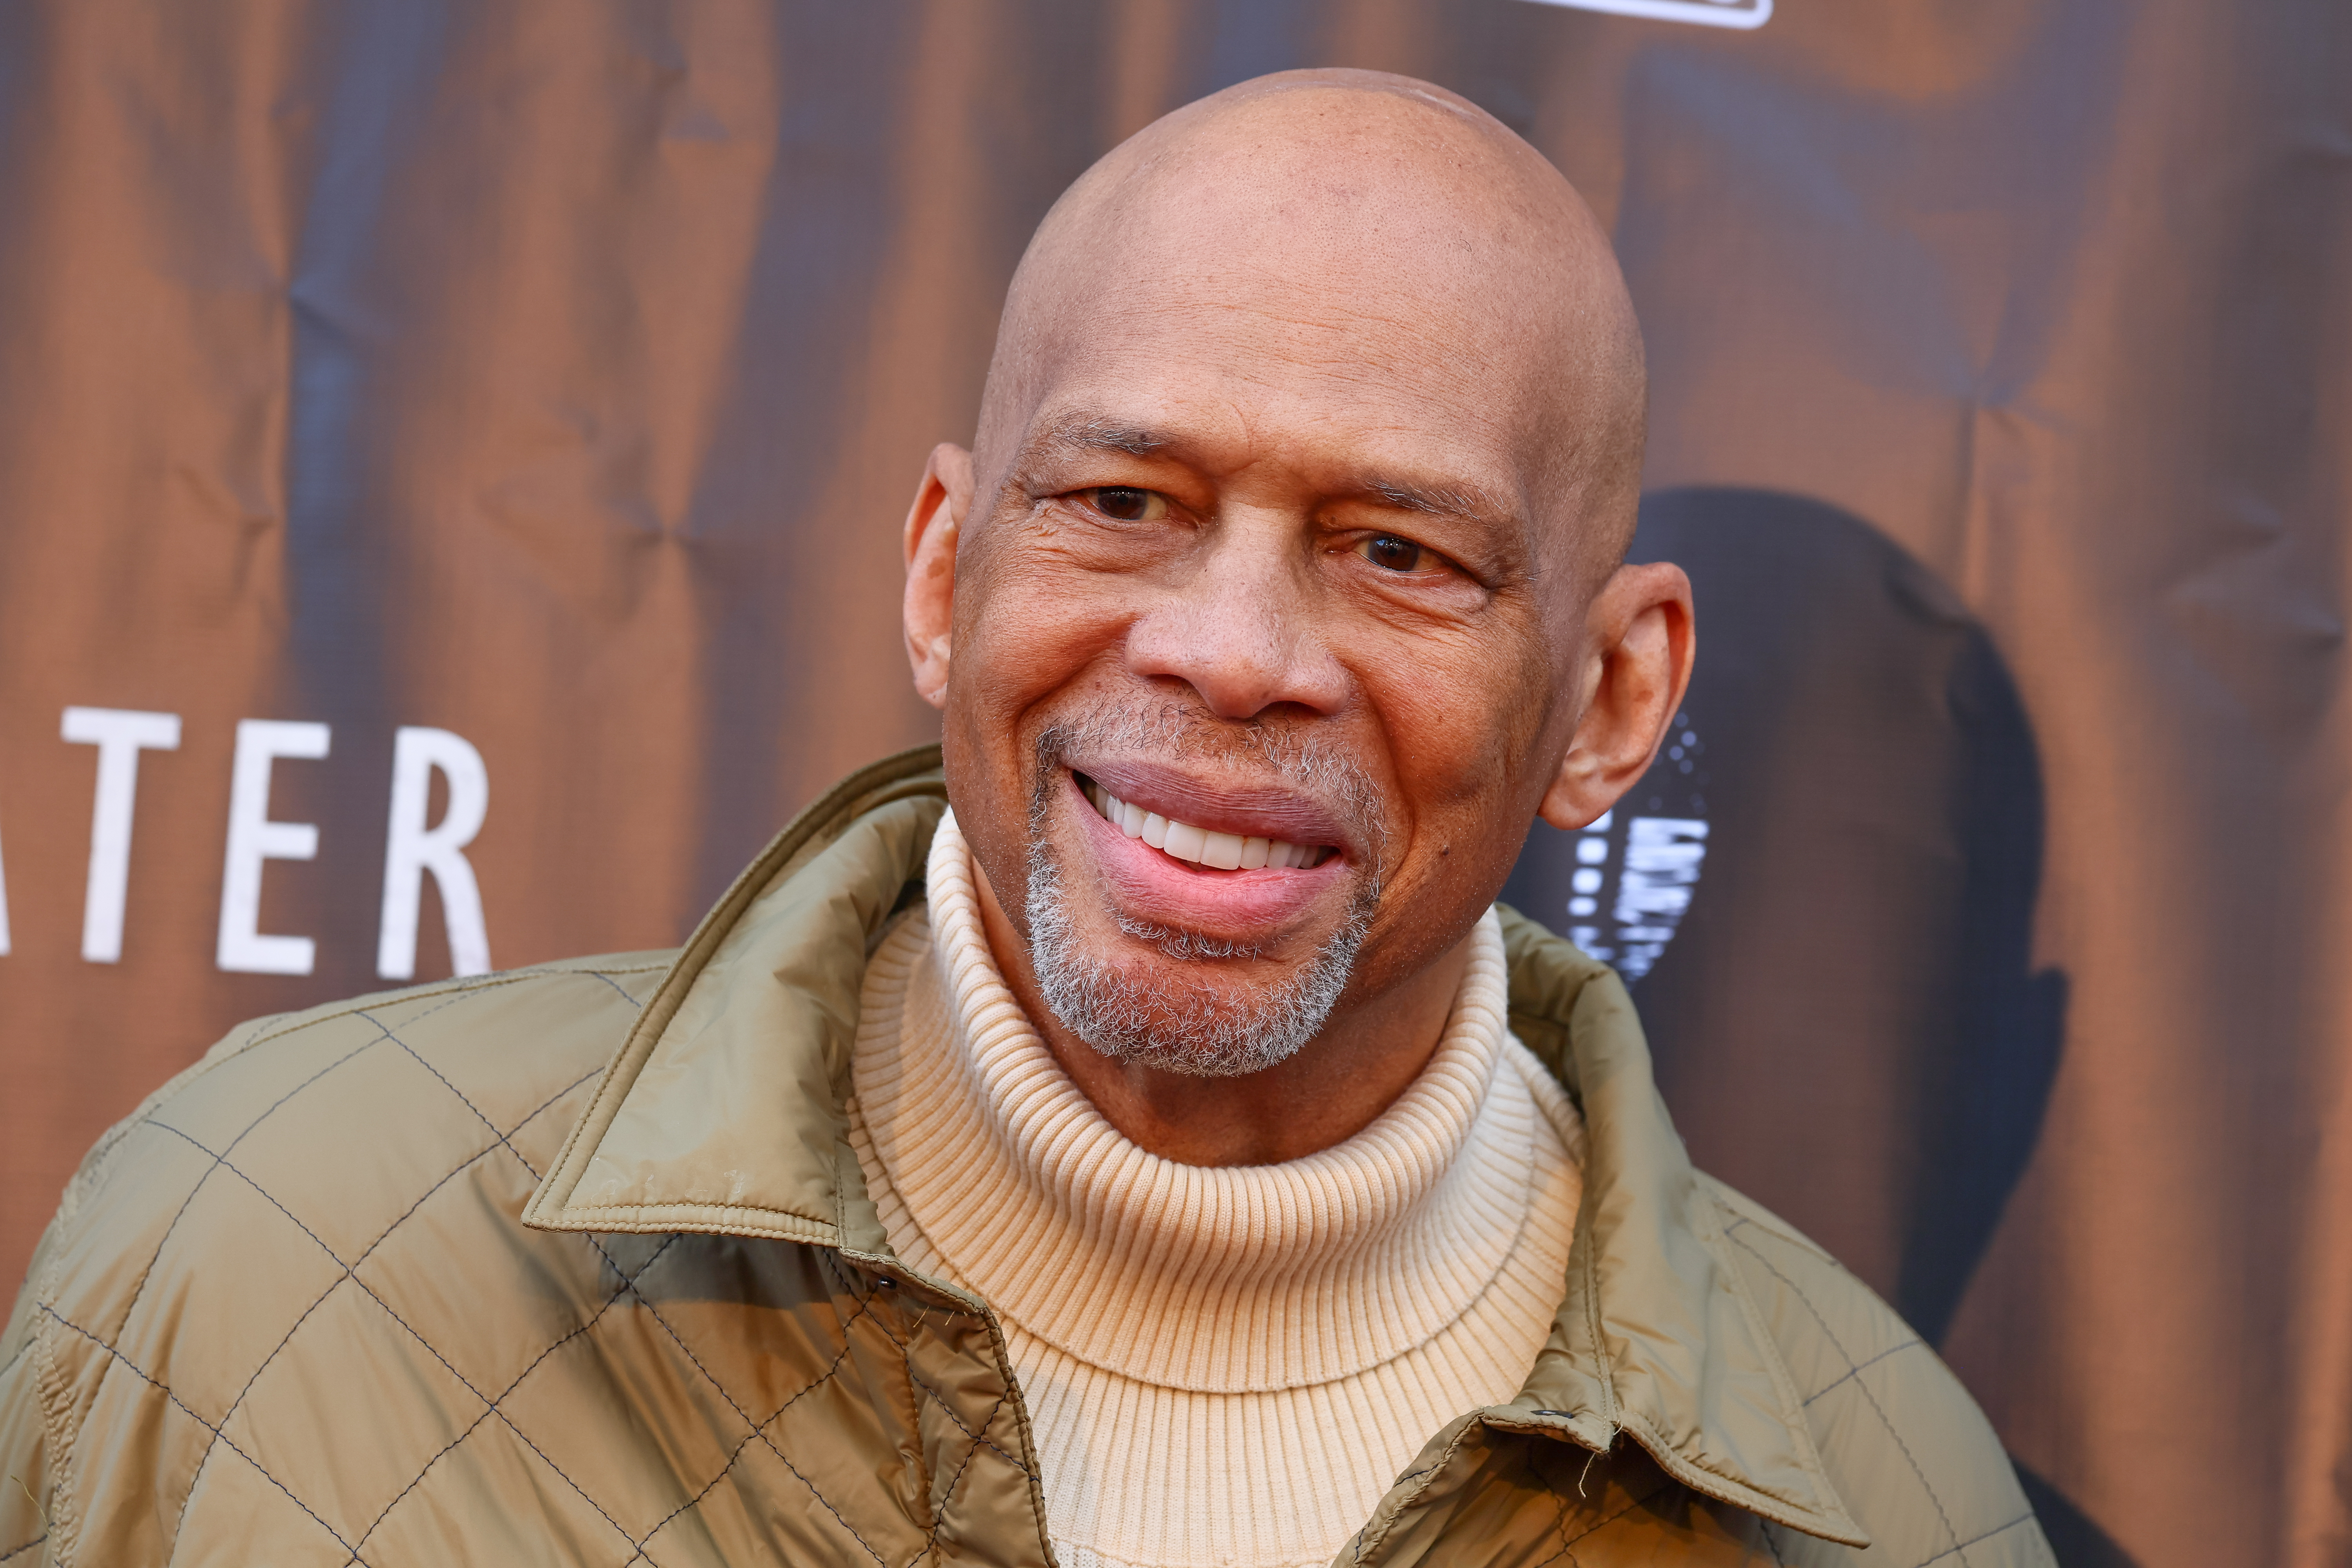 Kareem Abdul-Jabbar at the Los Angeles premiere of "Sweetwater" on April 11, 2023, in Burbank, California. | Source: Getty Images